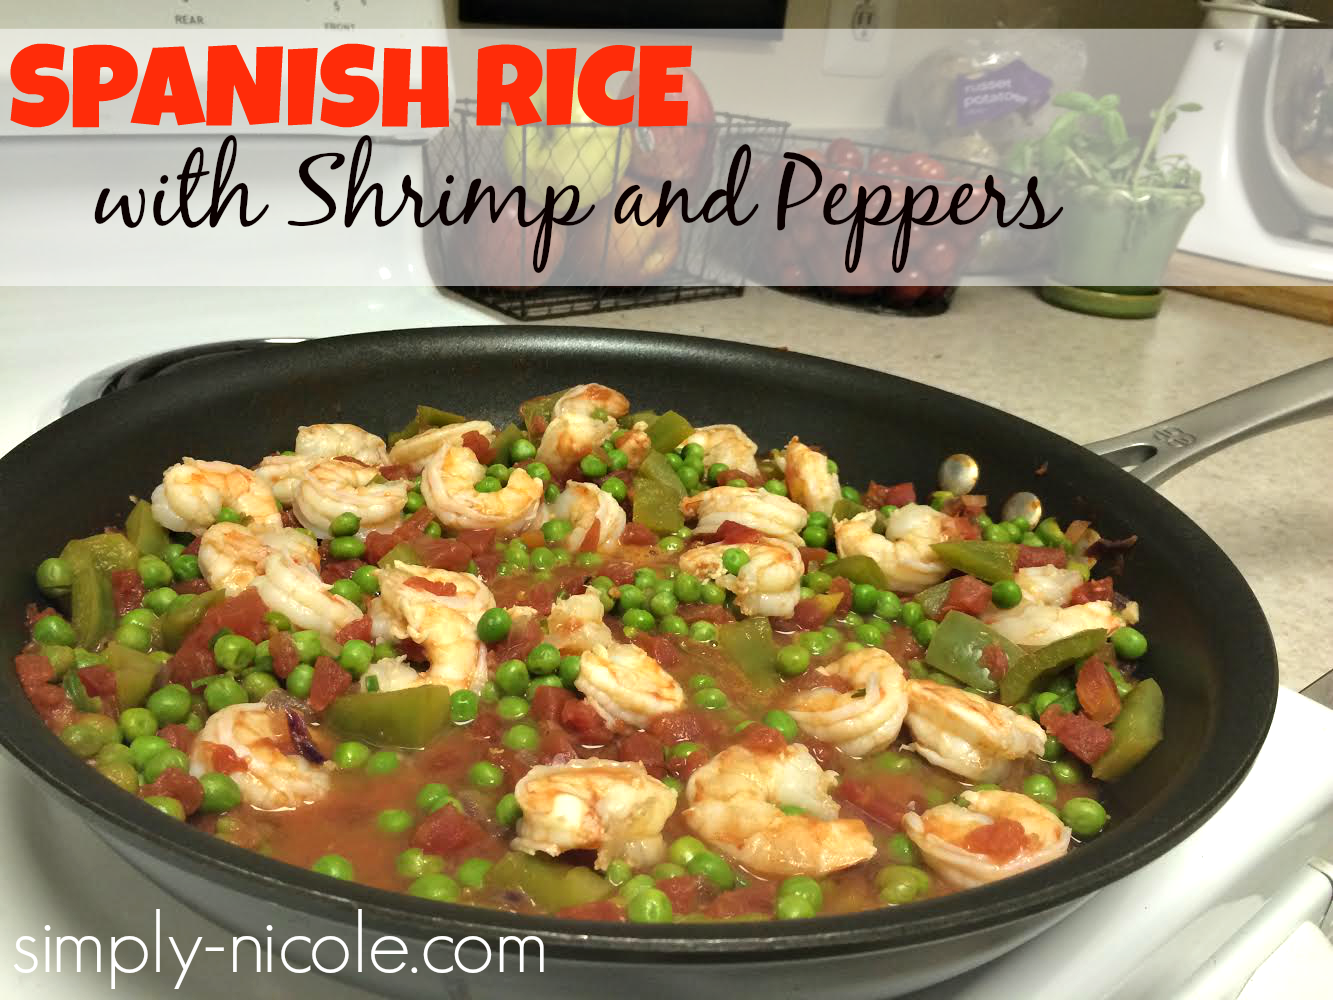 Spanish Rice with Shrimp and Peppers at simply-nicole.com